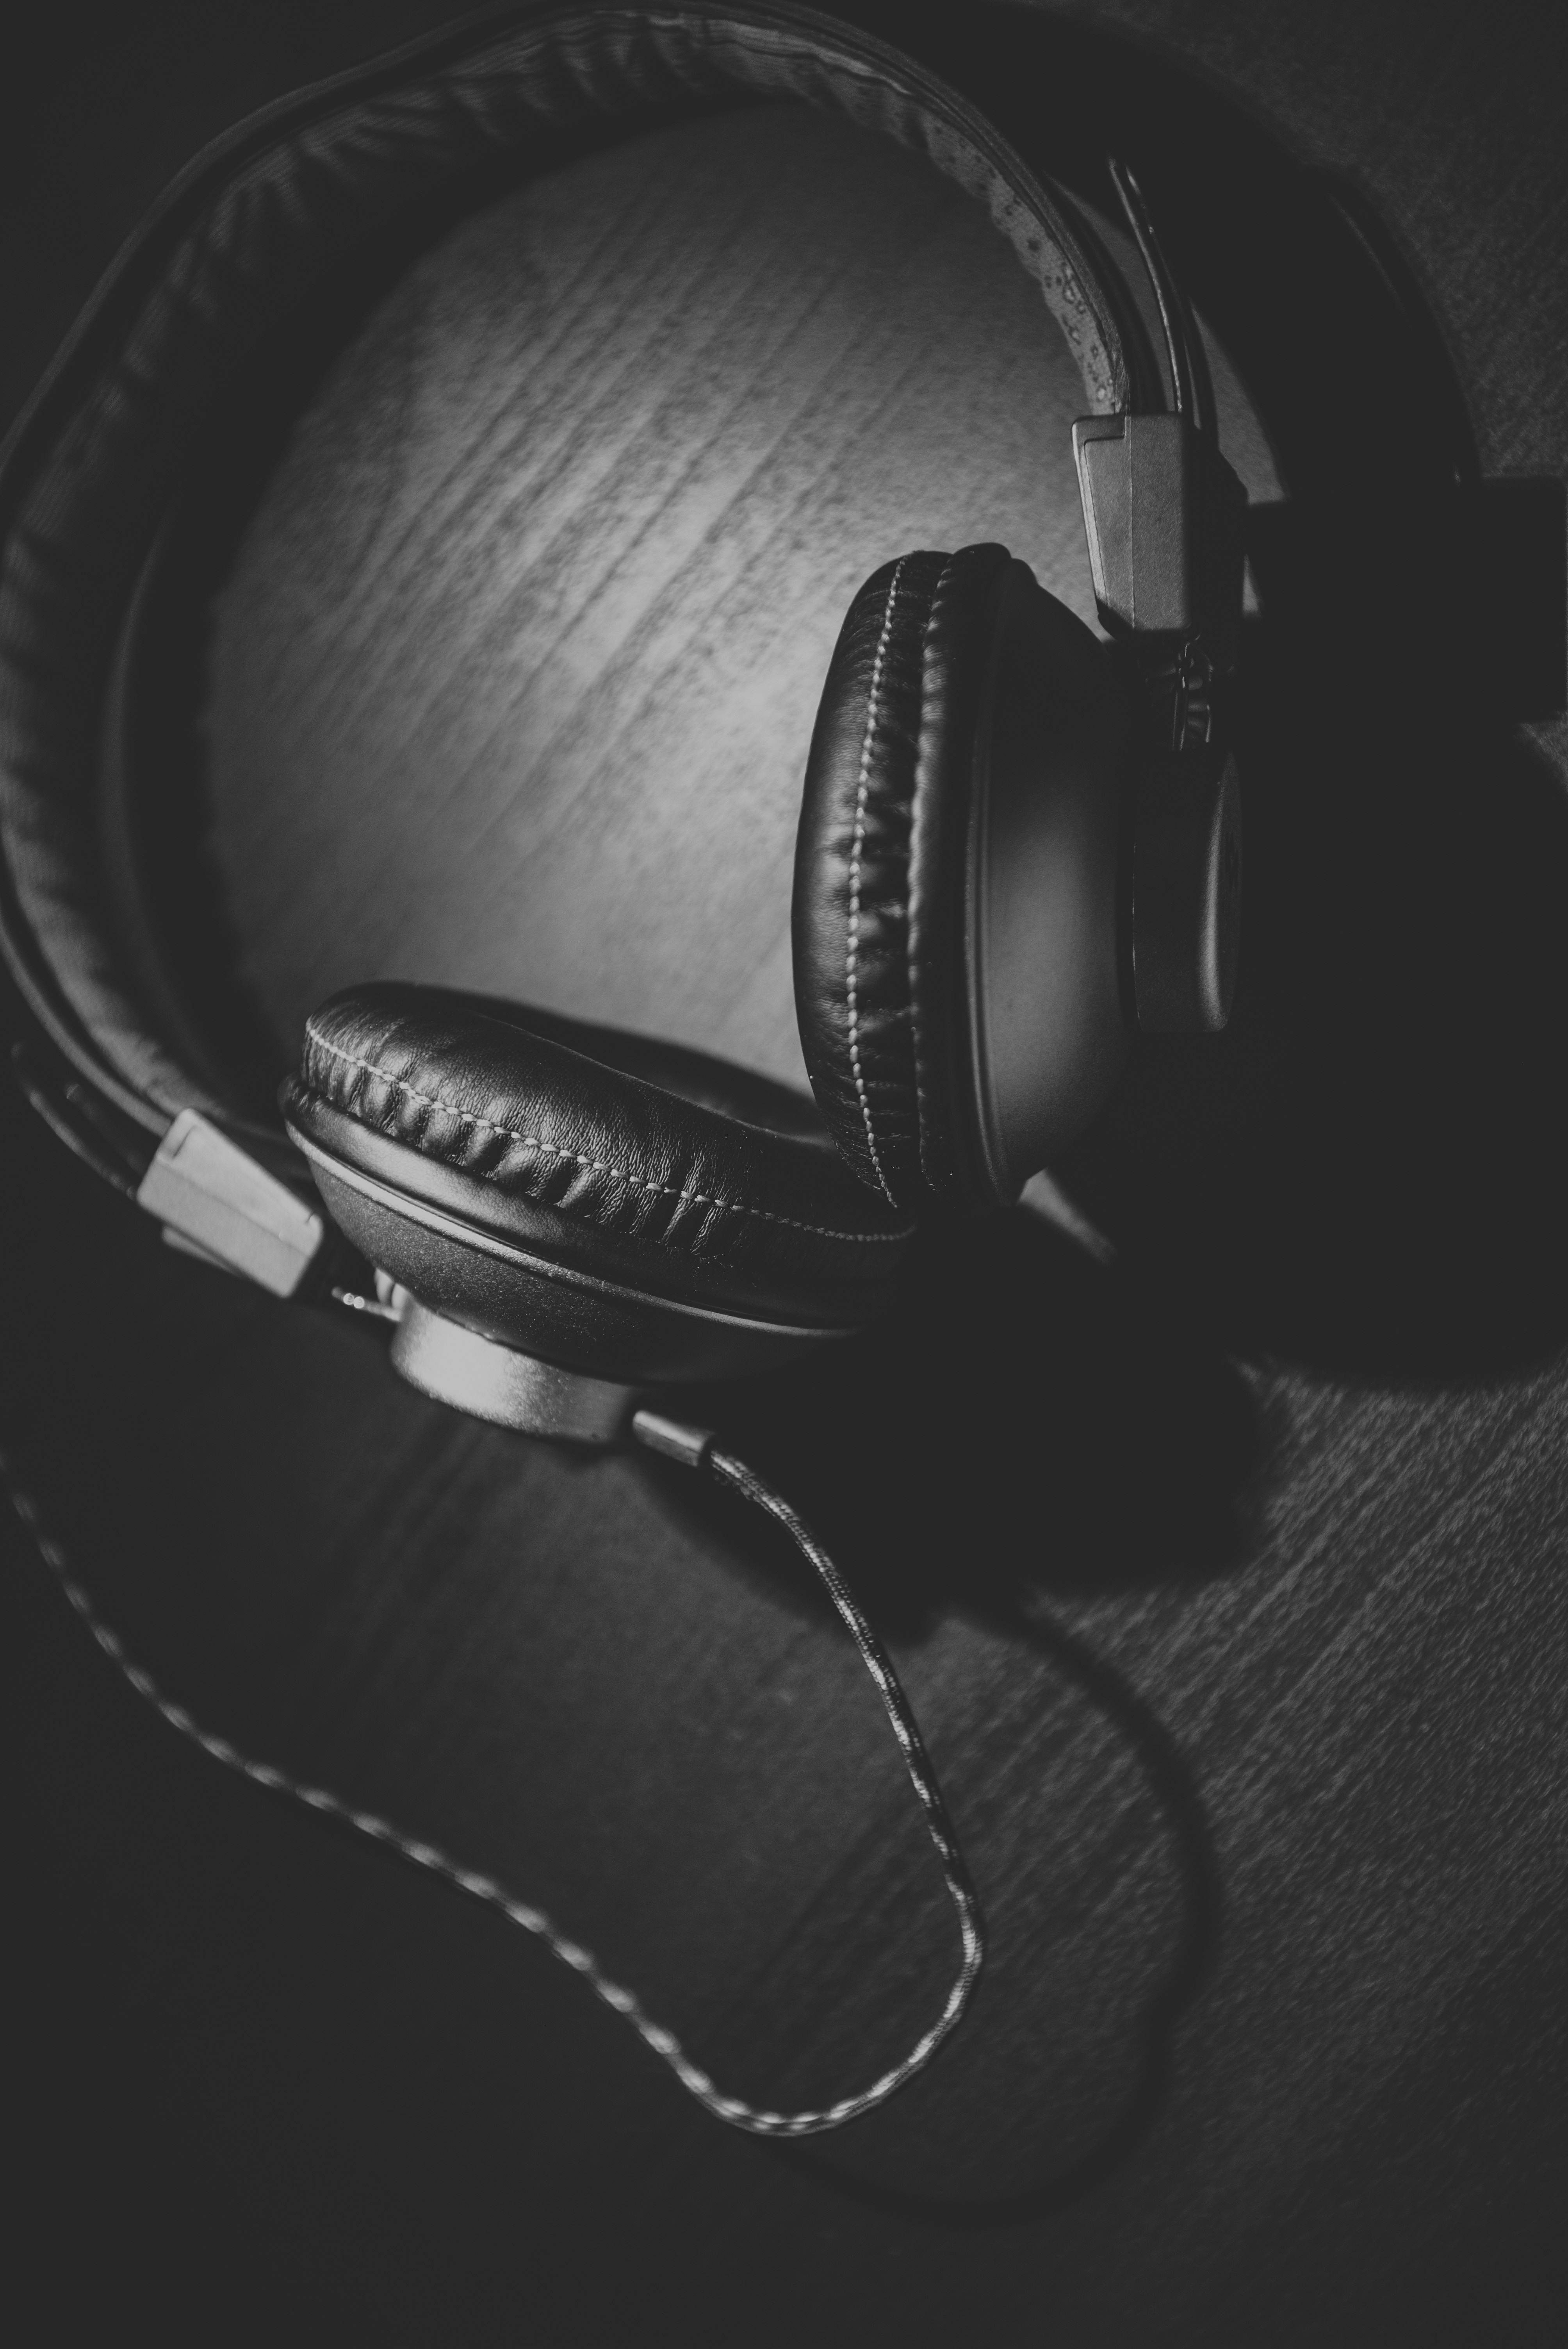 100+ Headphone Pictures | Download Free Images on Unsplash